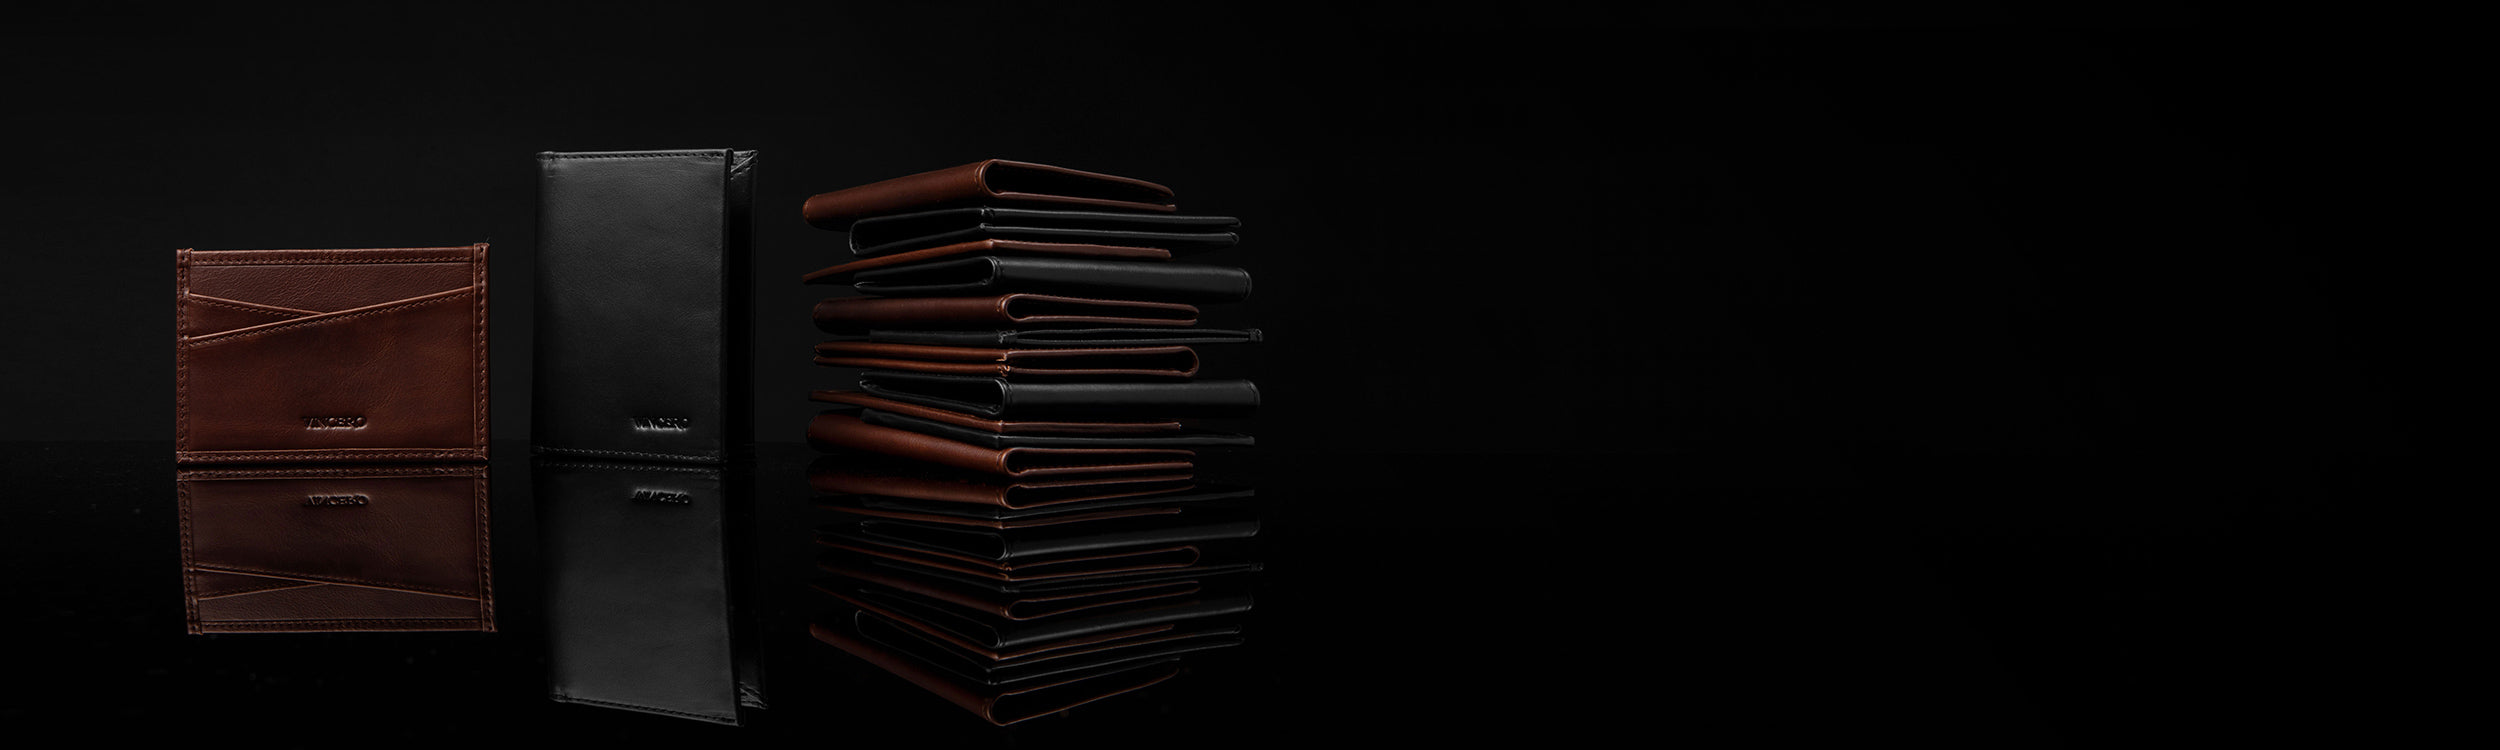 Brown wallet, black wallet, and stack of wallets with bottom reflection in black background